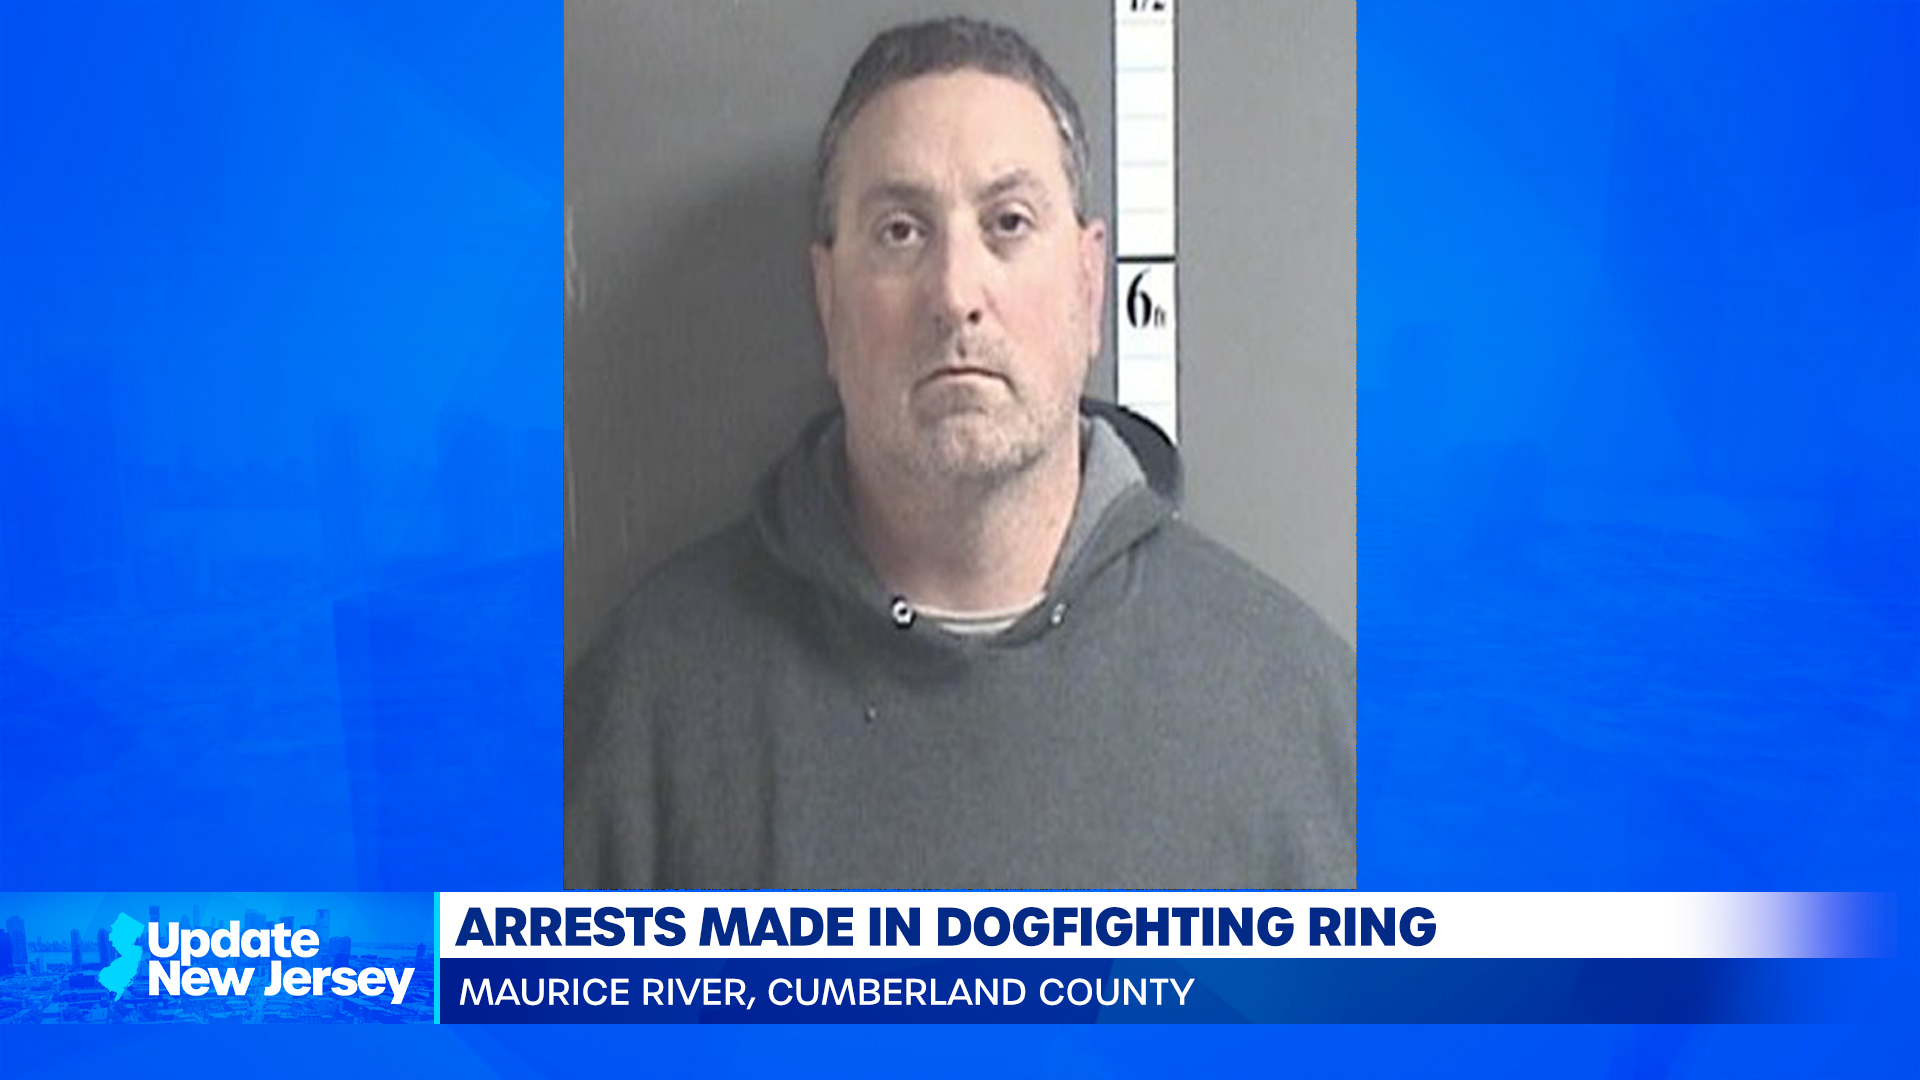 News Update: Man Arrested for Alleged Dogfighting Ring